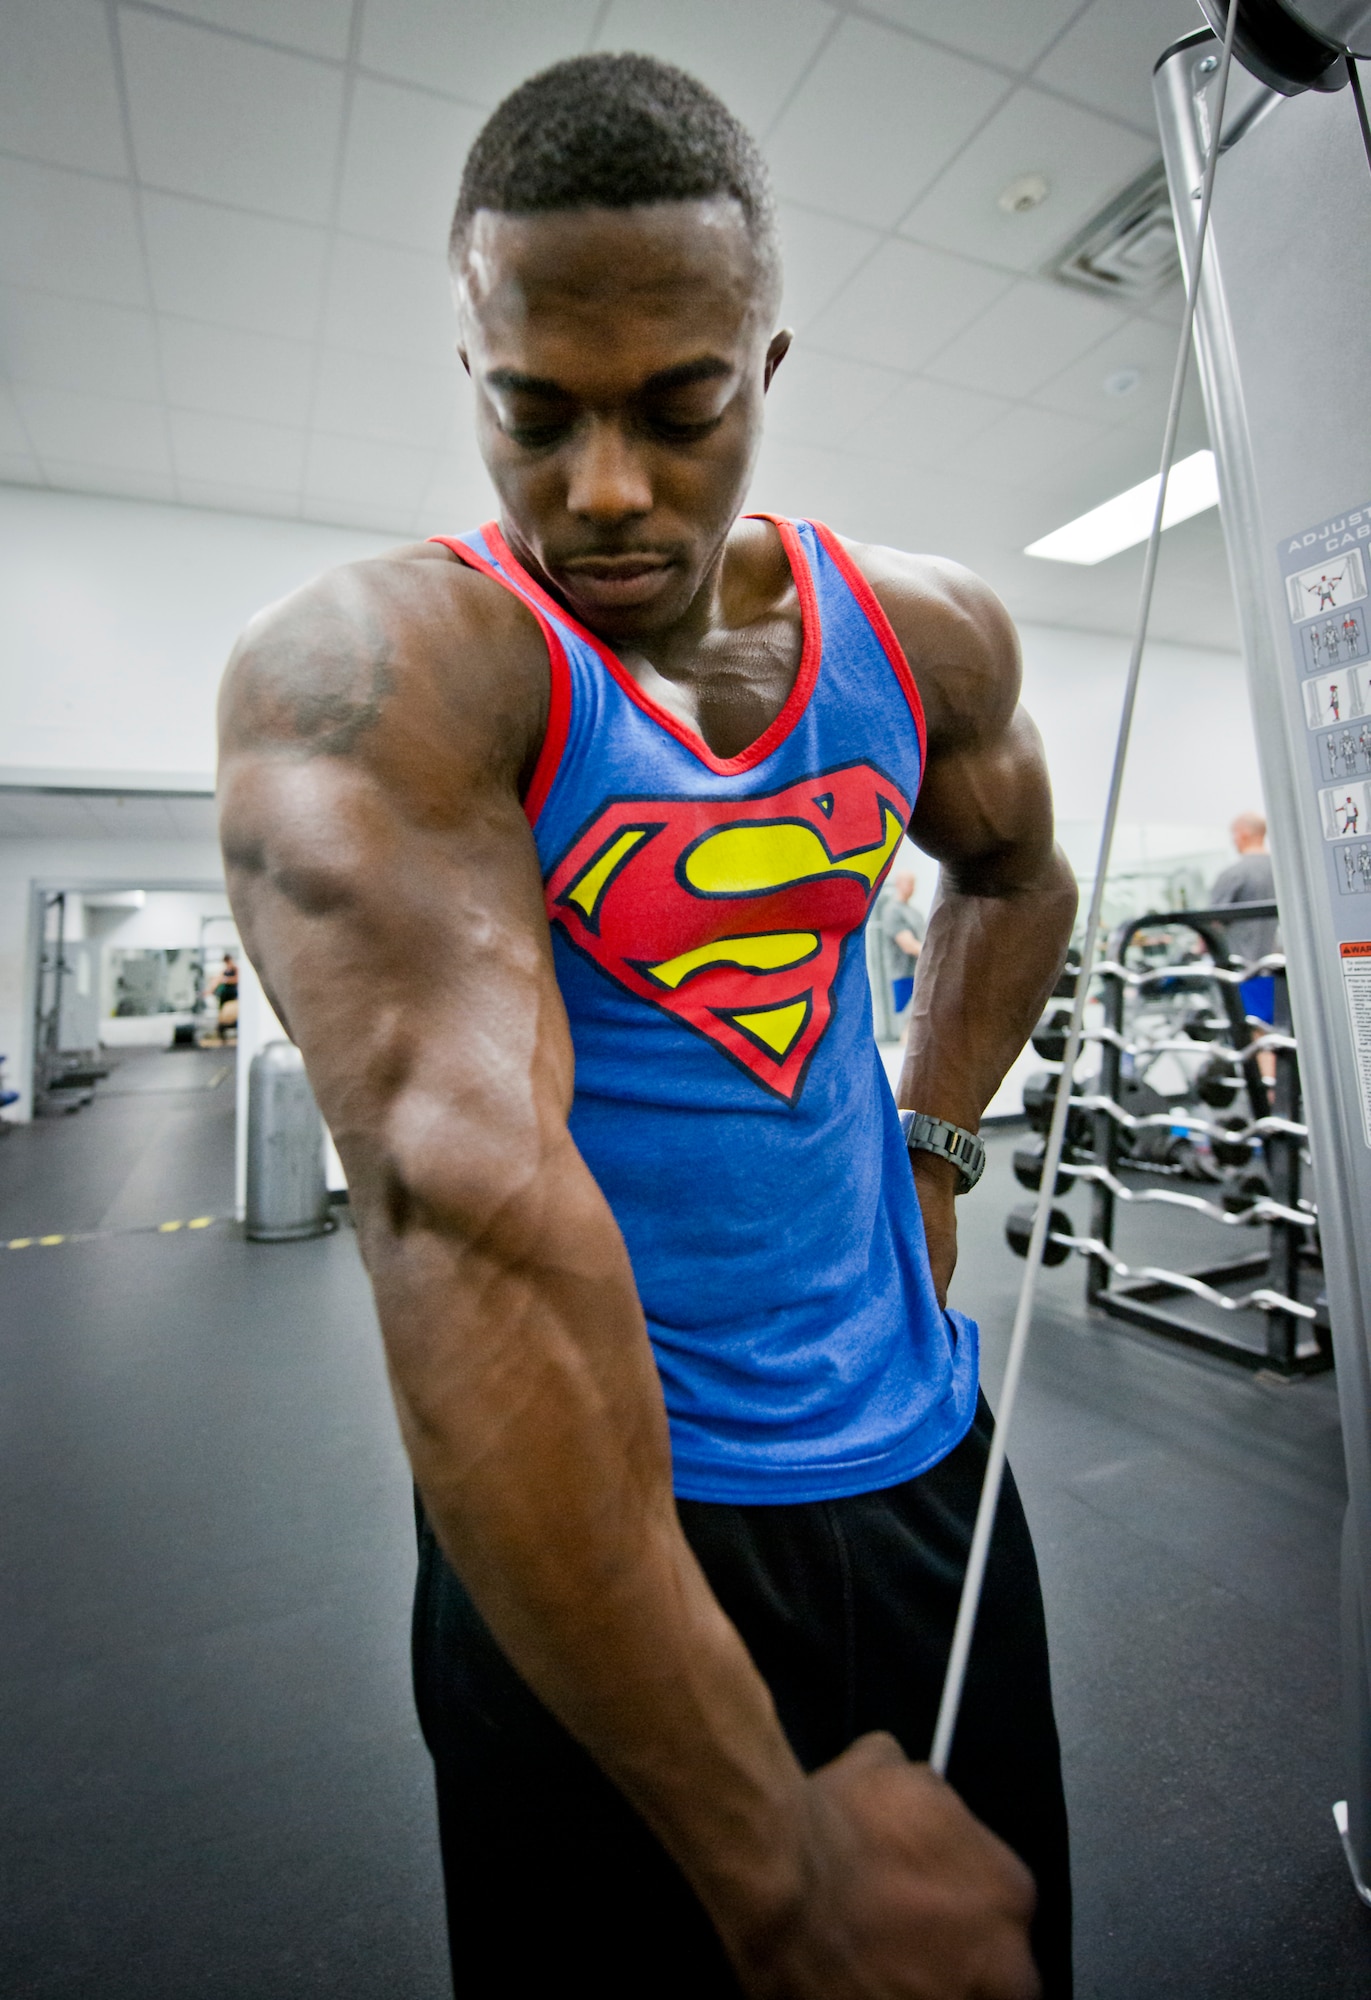 Senior Airman Terrence Ruffin, 16th Electronic Warfare Squadron, strains for an extra rep on a weight machine at the fitness center on Eglin Air Force Base, Fla.  In November, the Airman became the youngest professional bodybuilder on the circuit at age 21.  (U.S. Air Force photo/Samuel King Jr.)